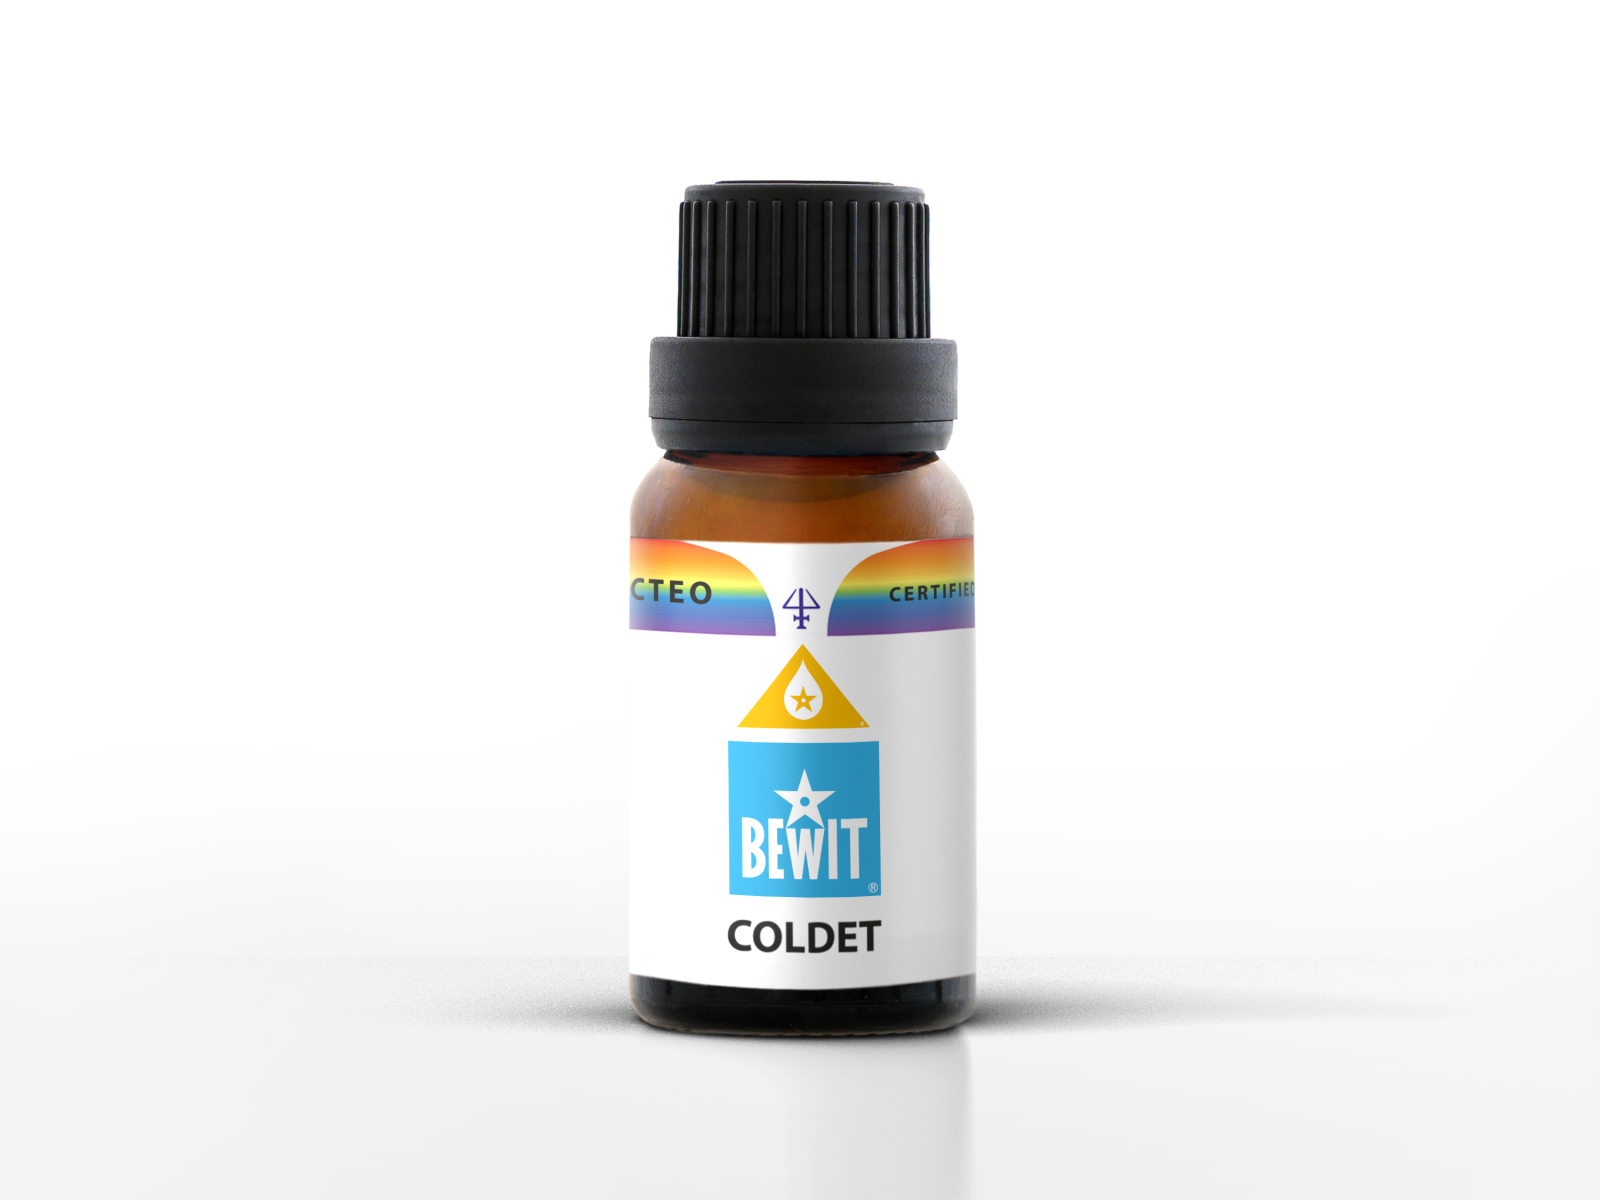 BEWIT COLDET - This is a blend of pure essential oils - 1